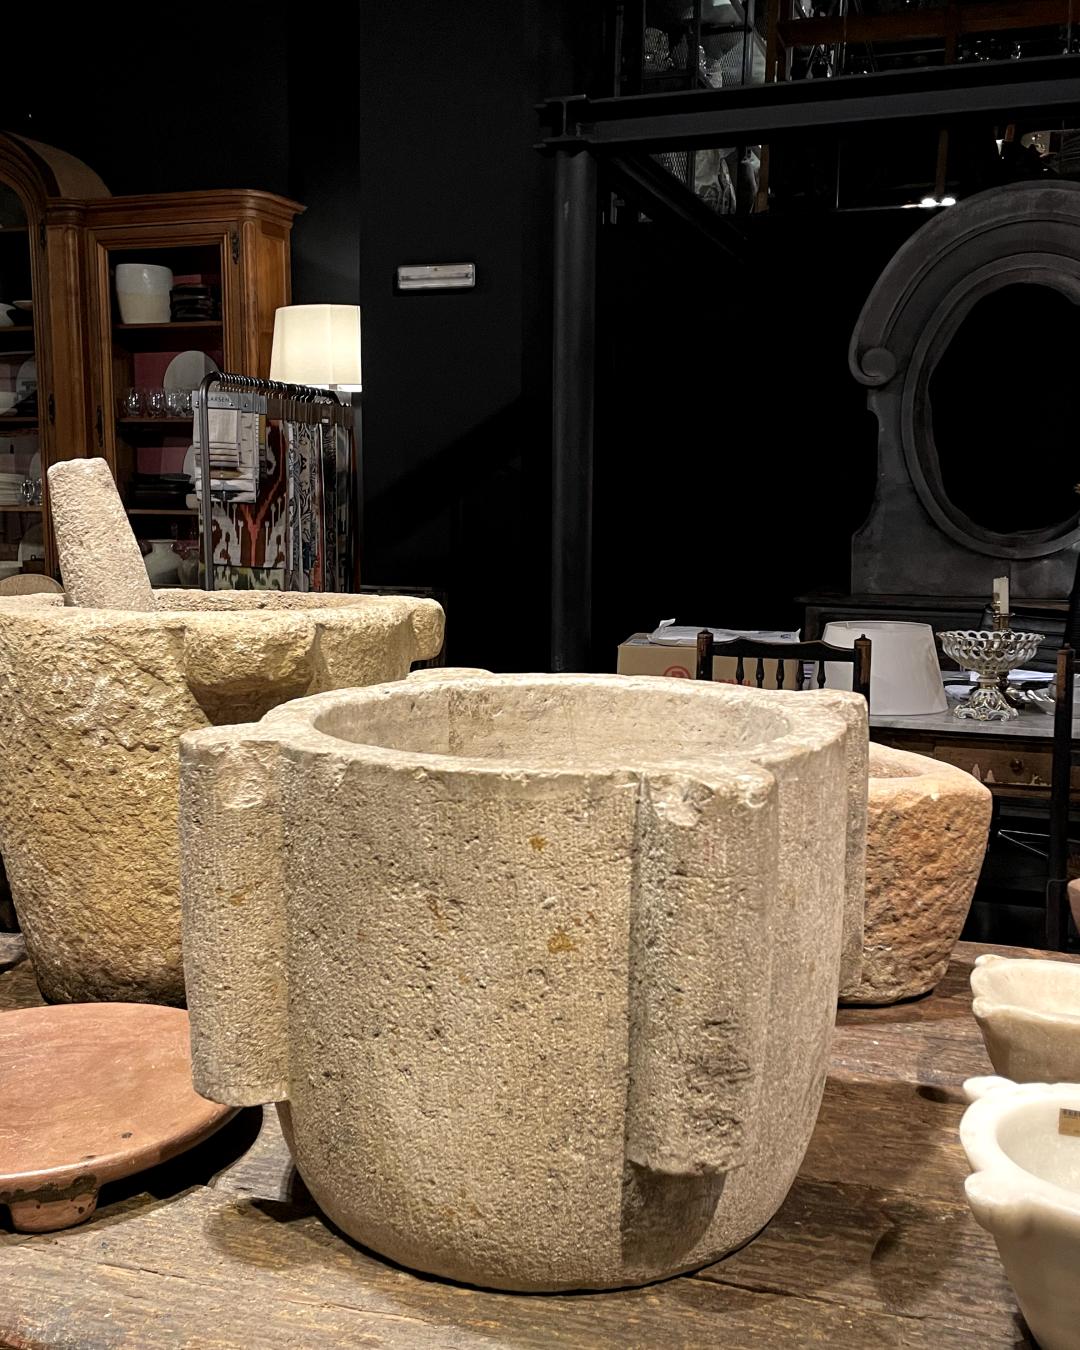 Embark on a gastronomic journey through time with our unparalleled culinary treasure, the Exquisite 16th Century Spanish White Stone Mortar. This monumental artifact, a symbol of the culinary sophistication of bygone eras, unveils its story within